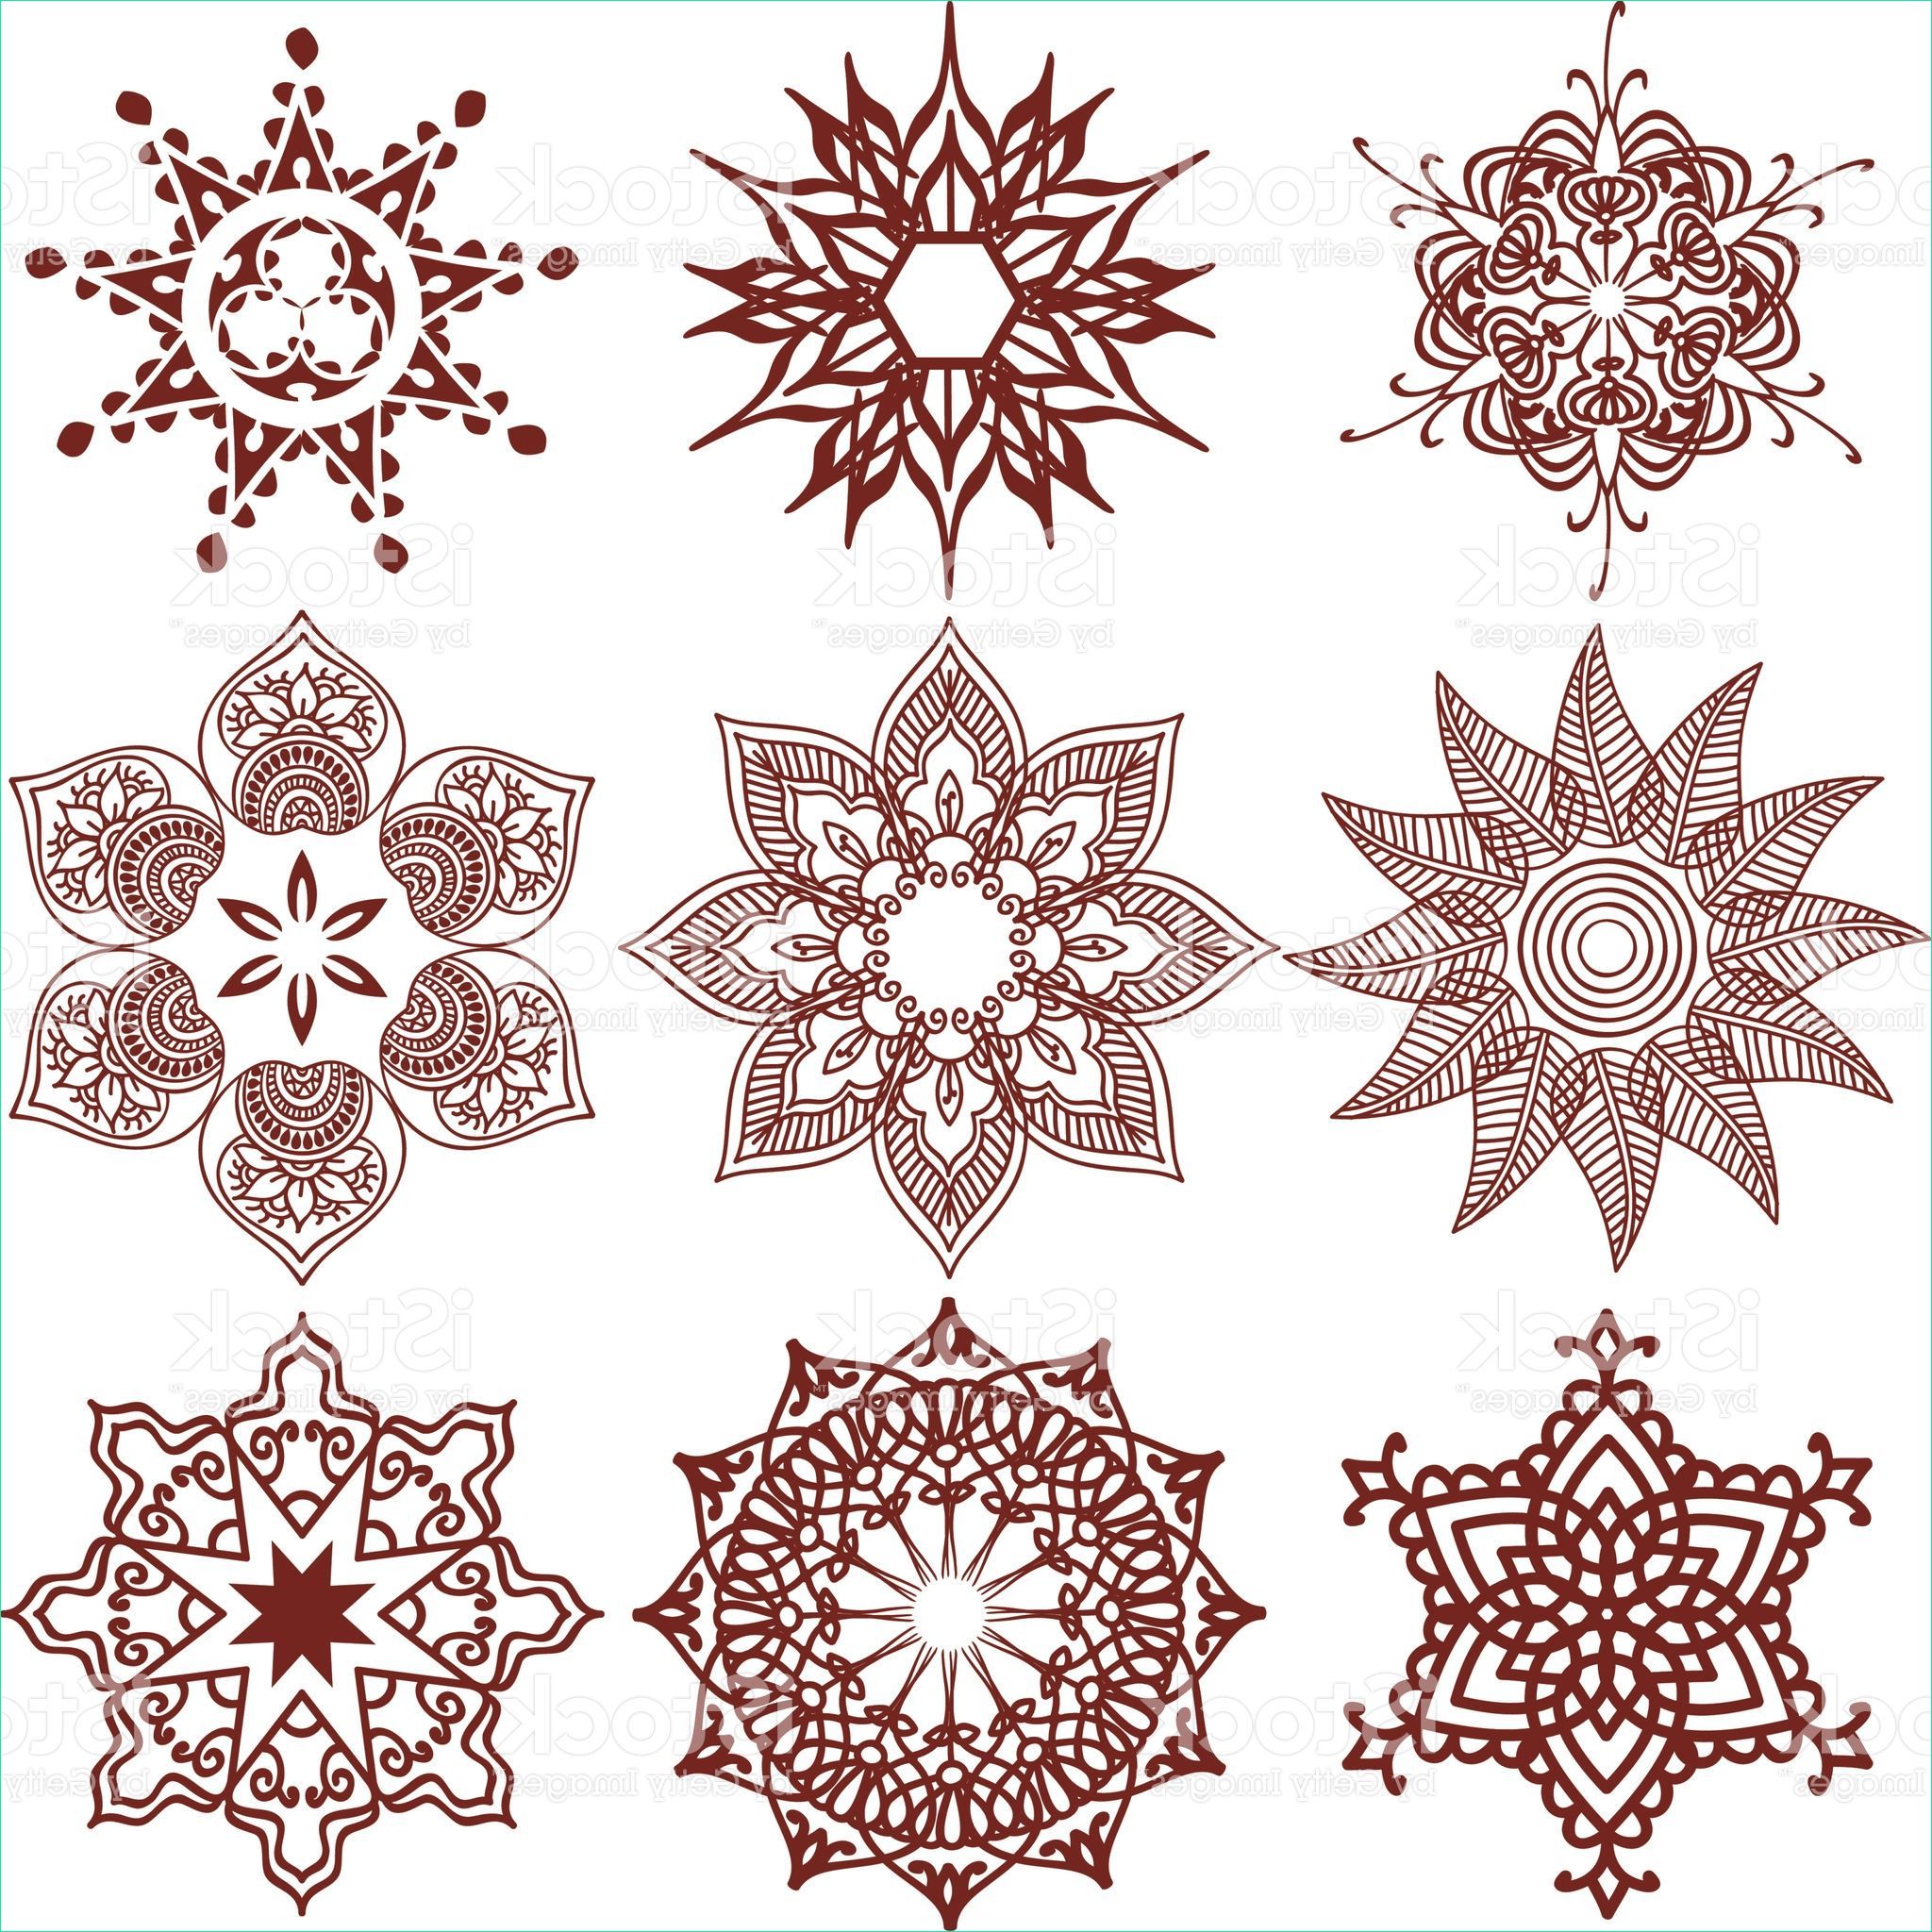 Mandala Flocon Impressionnant Stock A Collection Of Geometric Snowflake Designs Inspired by